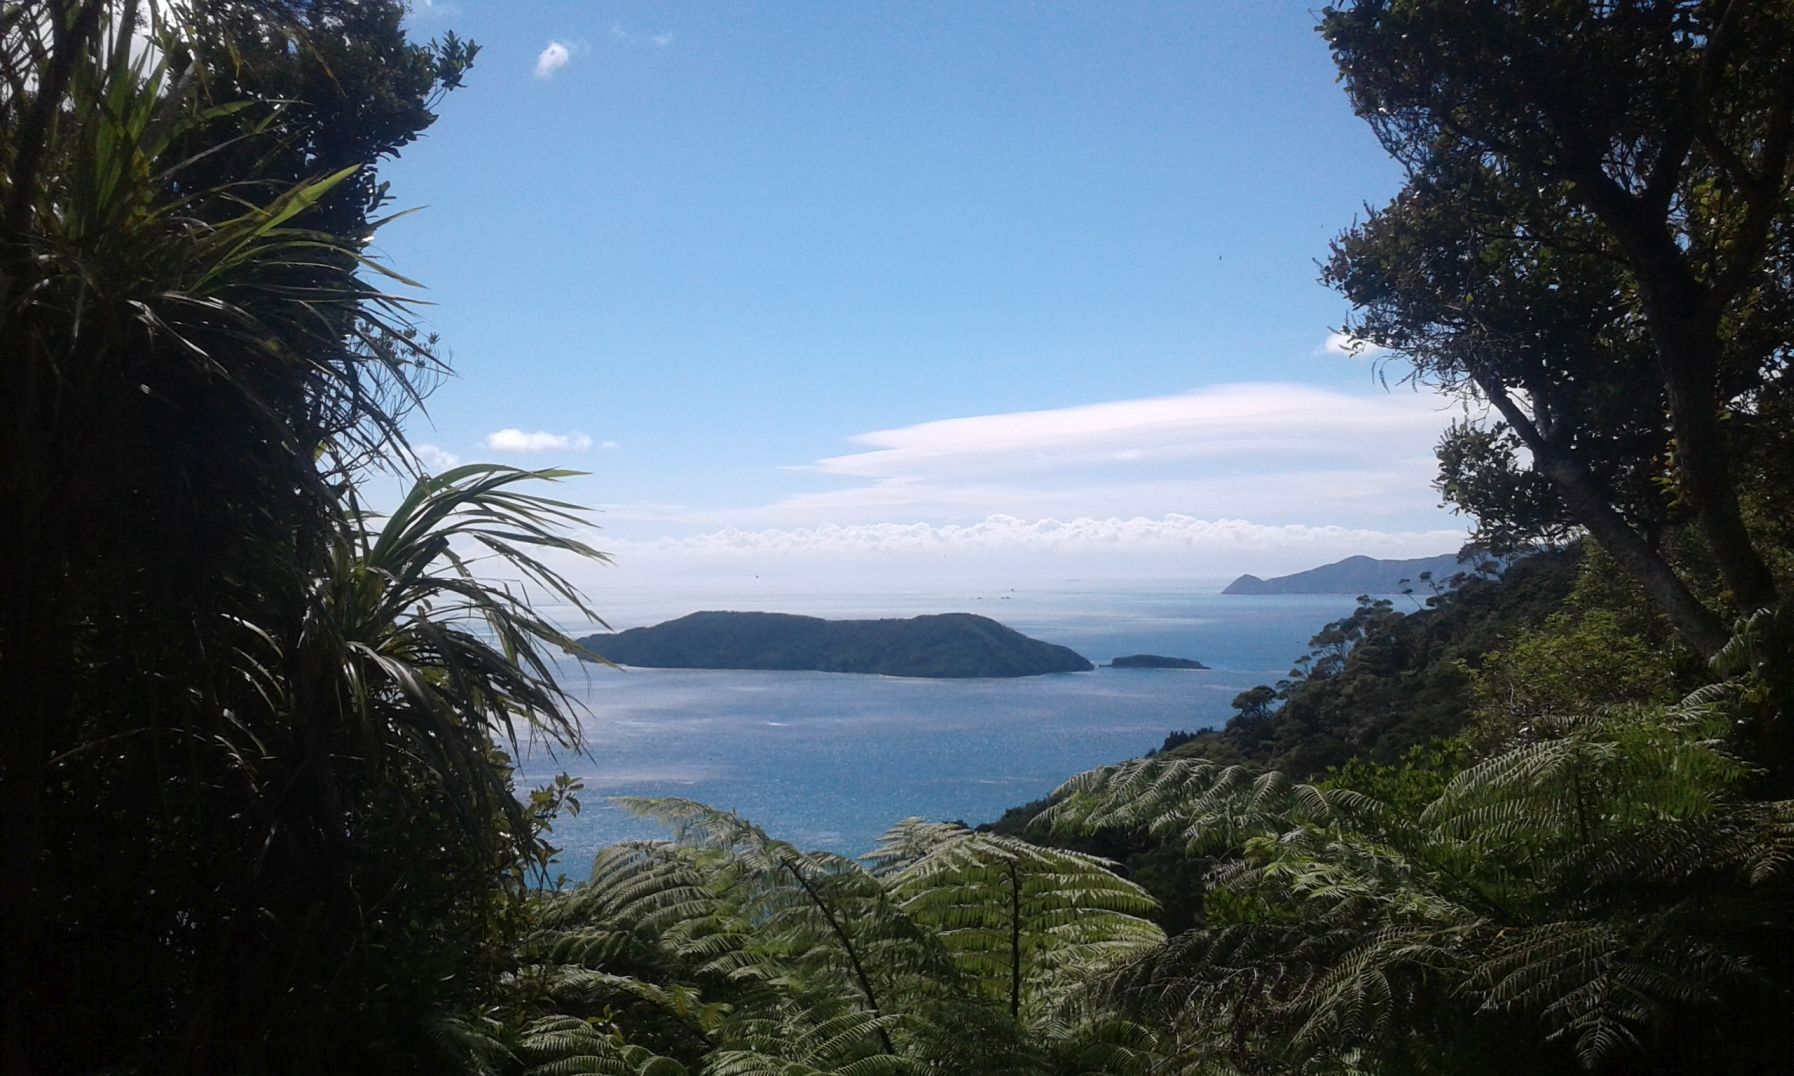 The allure of Picton and Queen Charlotte Sound